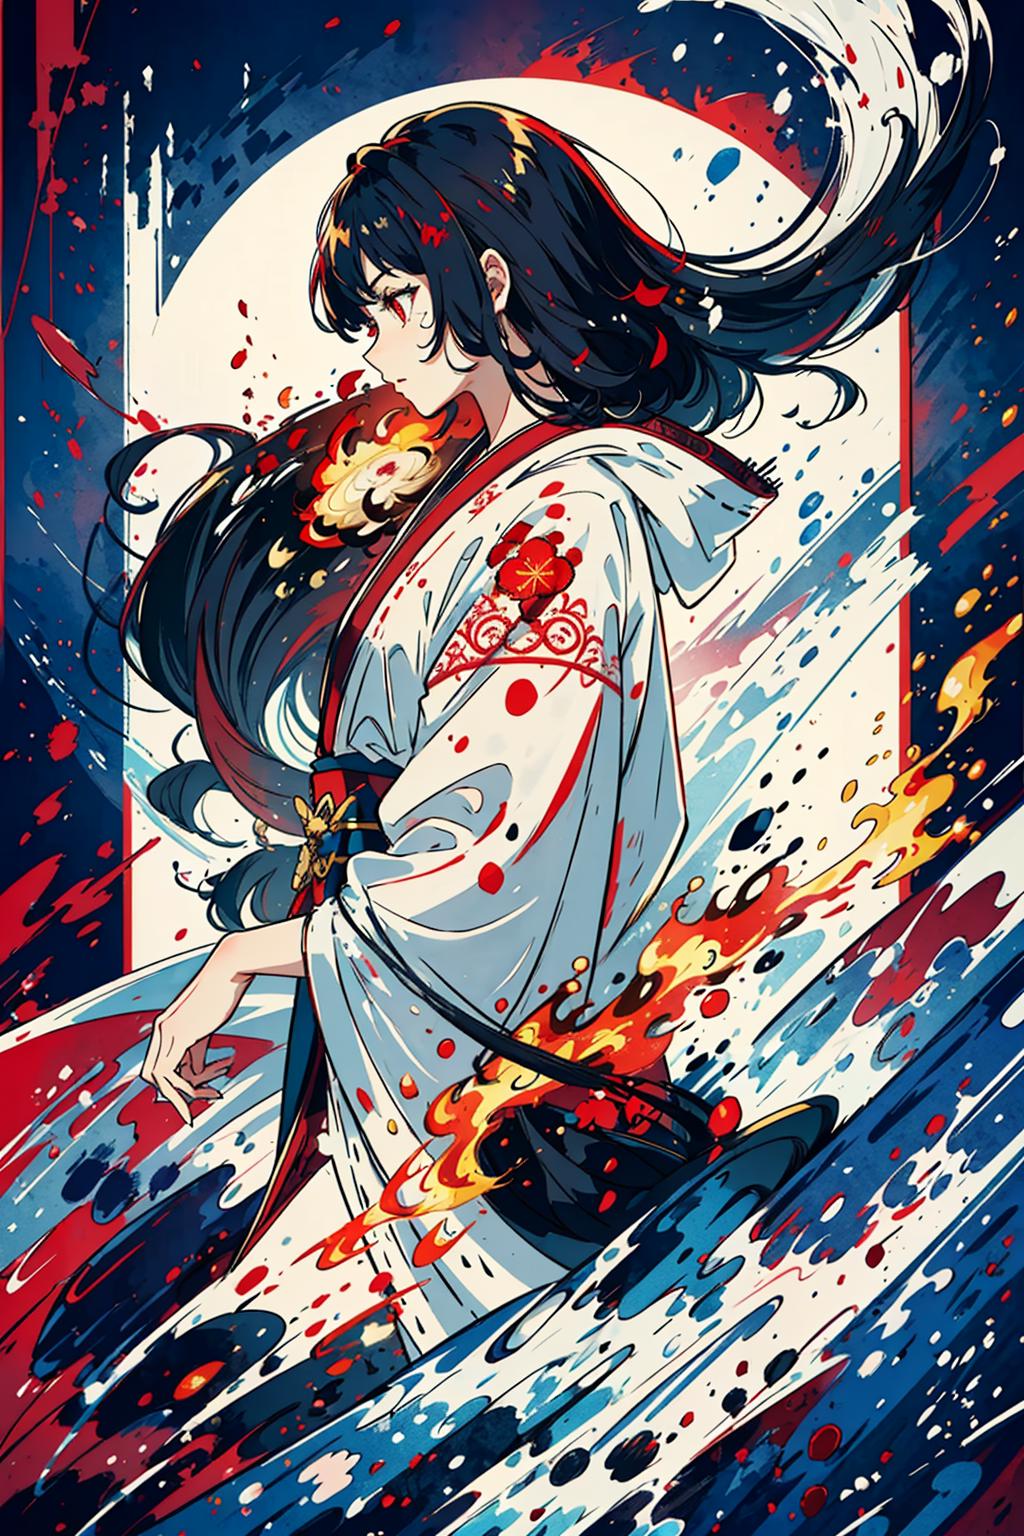 Anime Cartoon Japanese Woman with Long Black Hair and a White Kimono with Fire Elements in the Background.